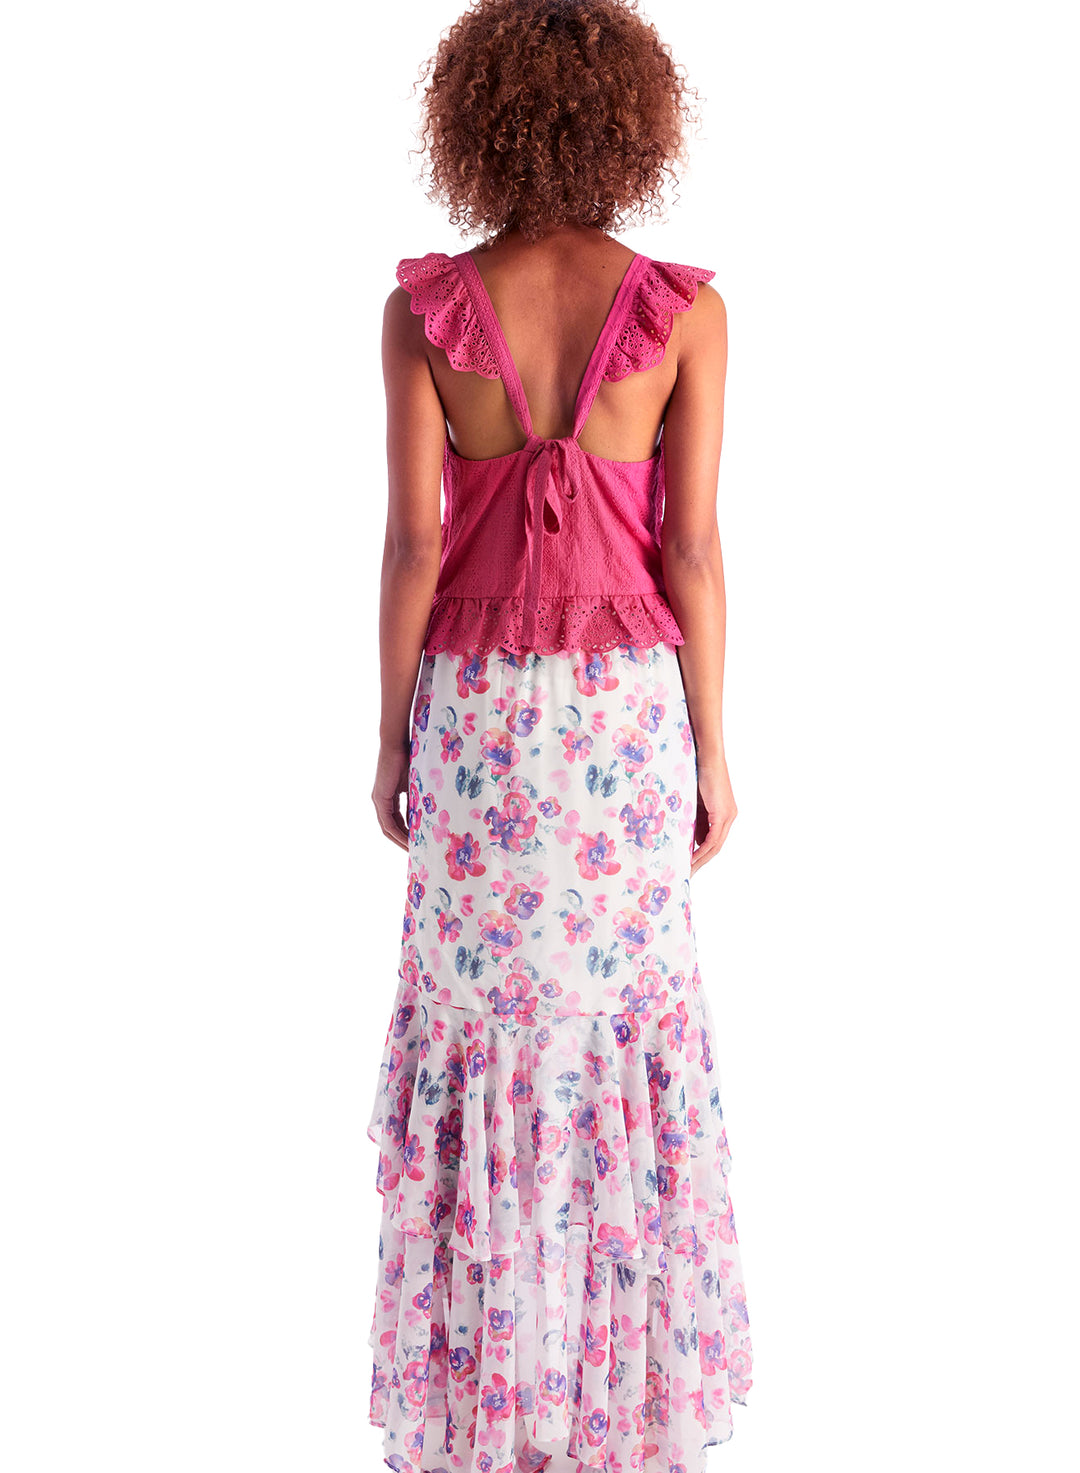 AVERY MAXI SKIRT - PINK FLORAL